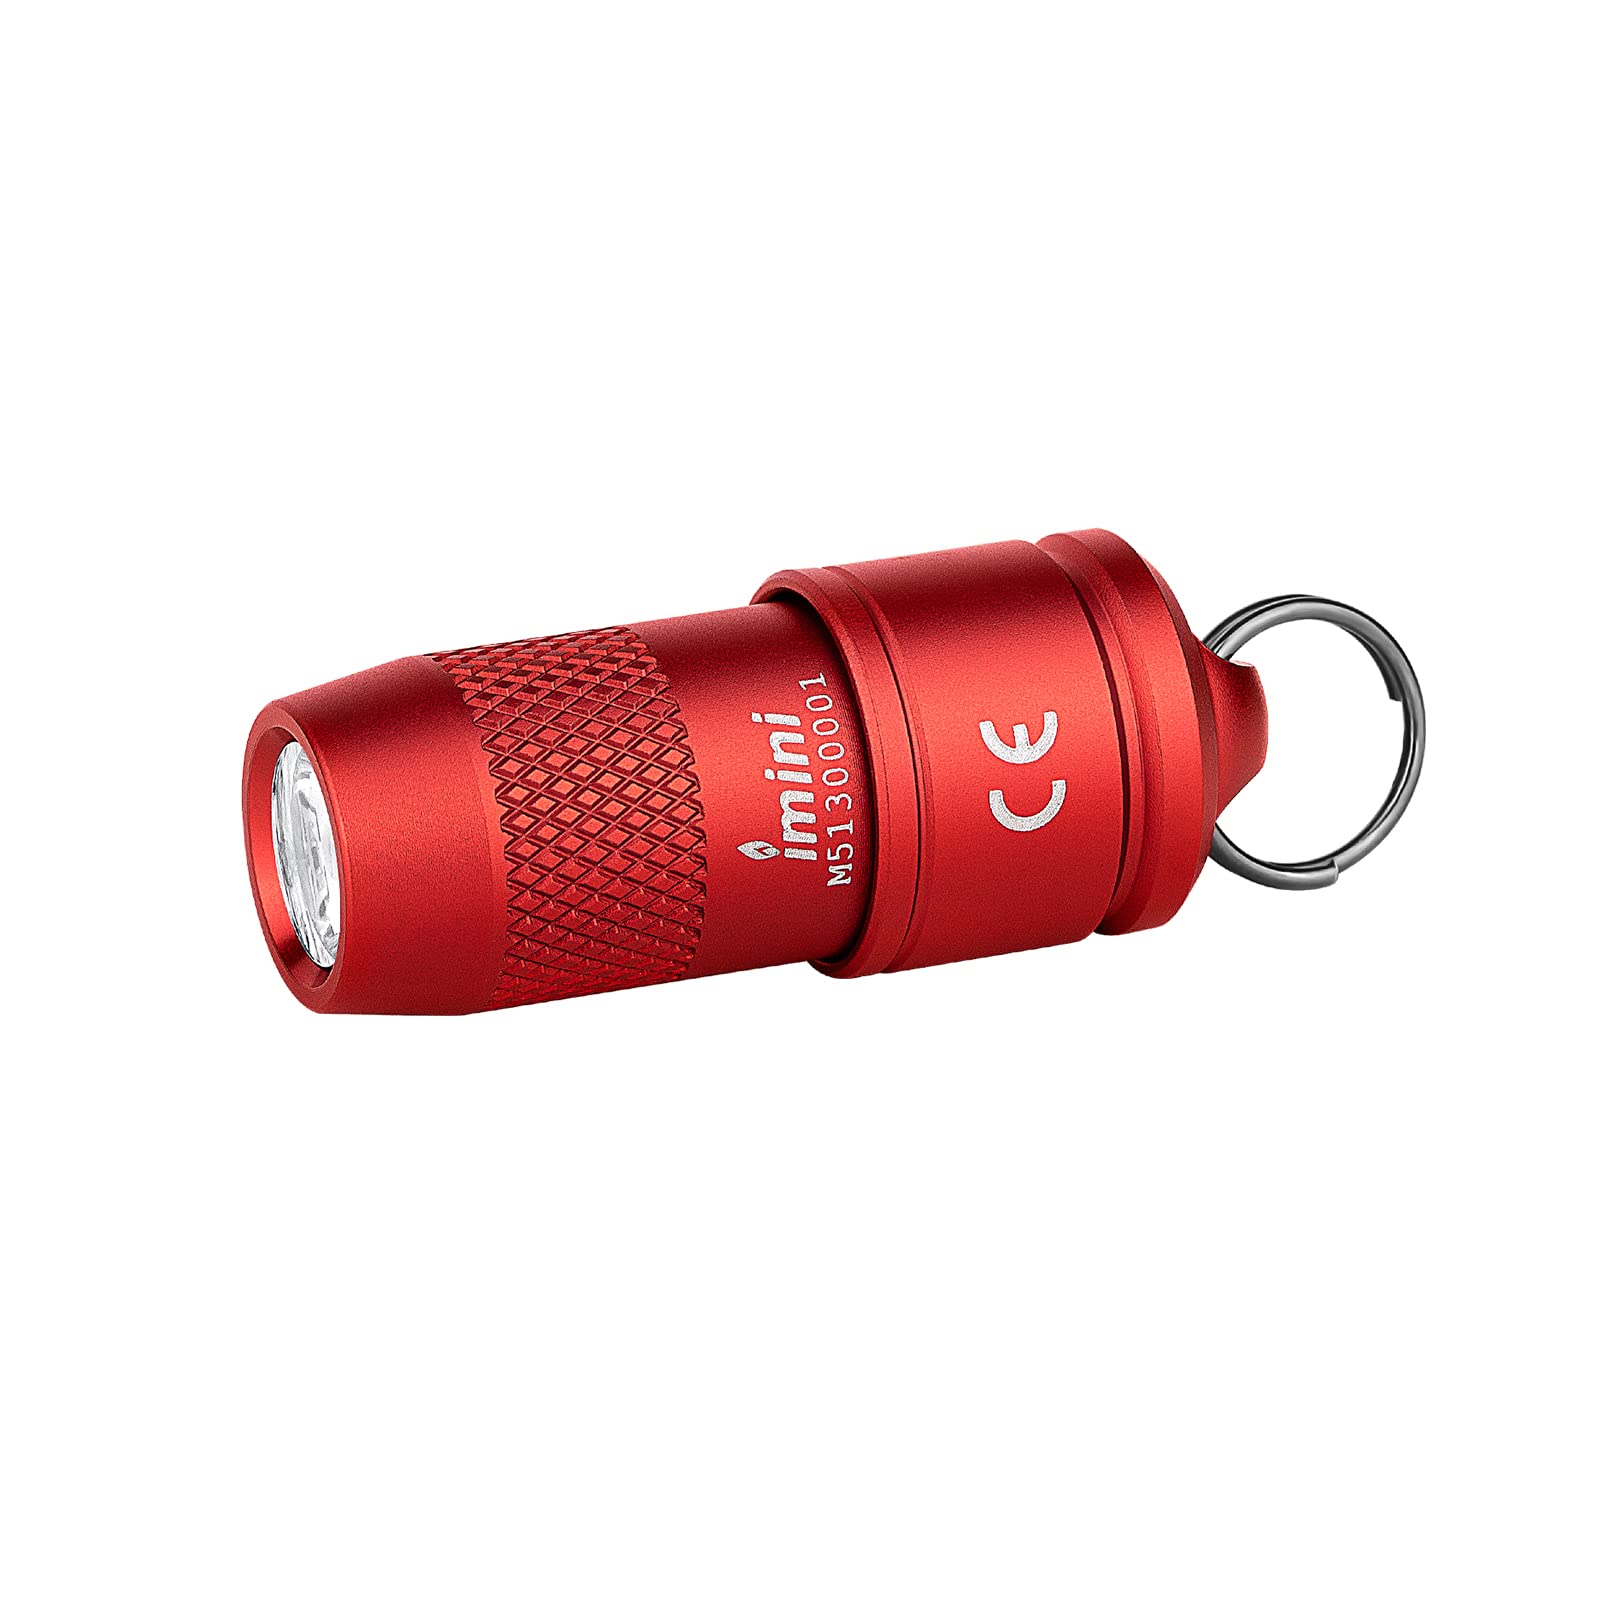 OLIGHT IMINI 10 Lumens Tiny Keychain Flashlight, Portable Quick-Release Small Flashlights with Magnetic Base, Powered by 3 LR41 Button Cells for EDC and Emergency (Red)